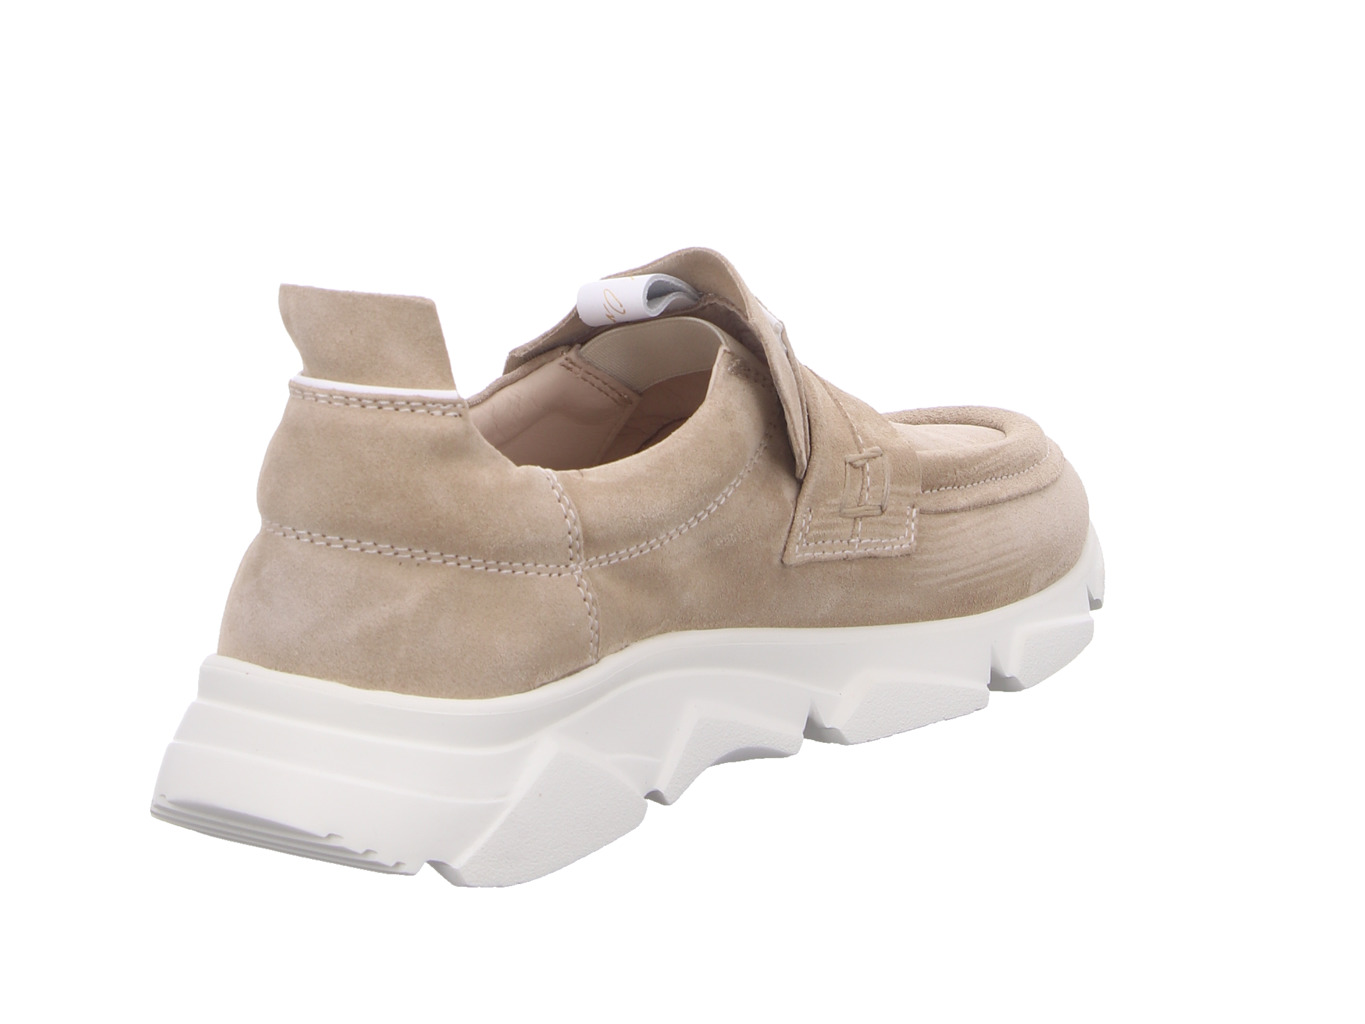 moma_pantofola_donna_beige_hell_3fs102_to_toy_visone_2116